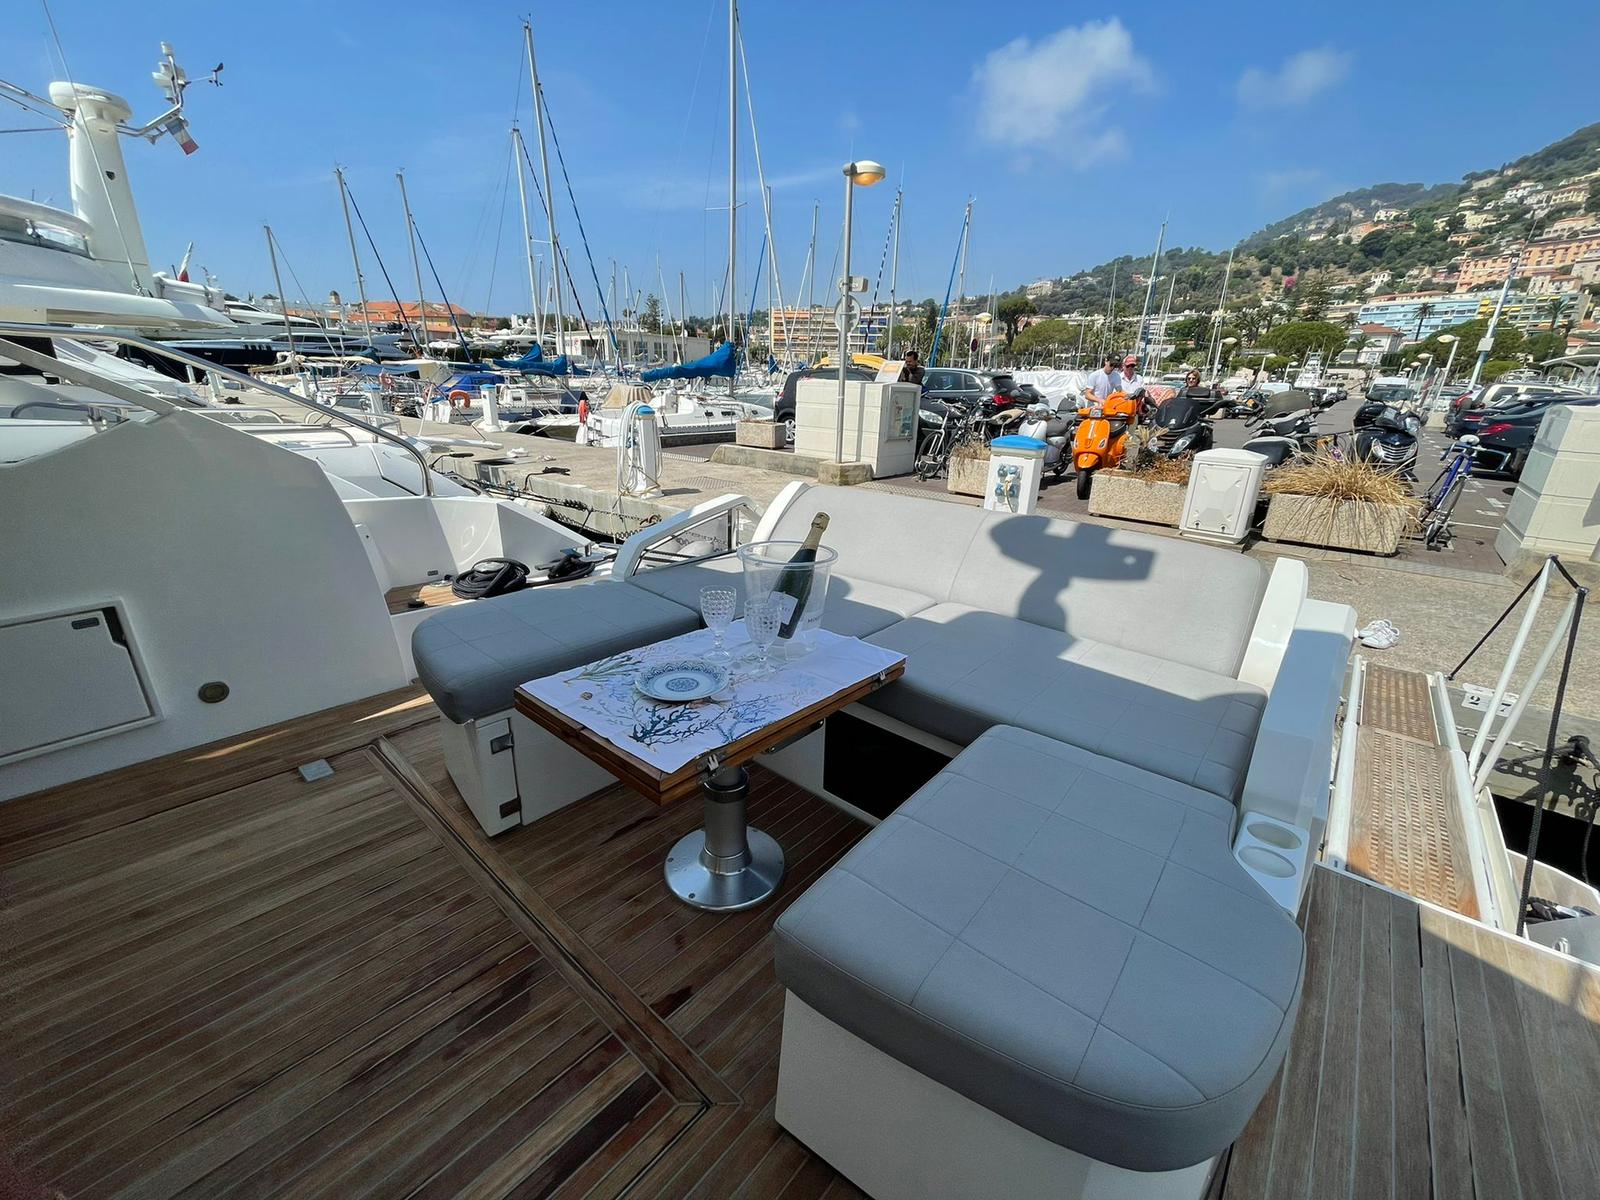 Day charter on the French Riviera